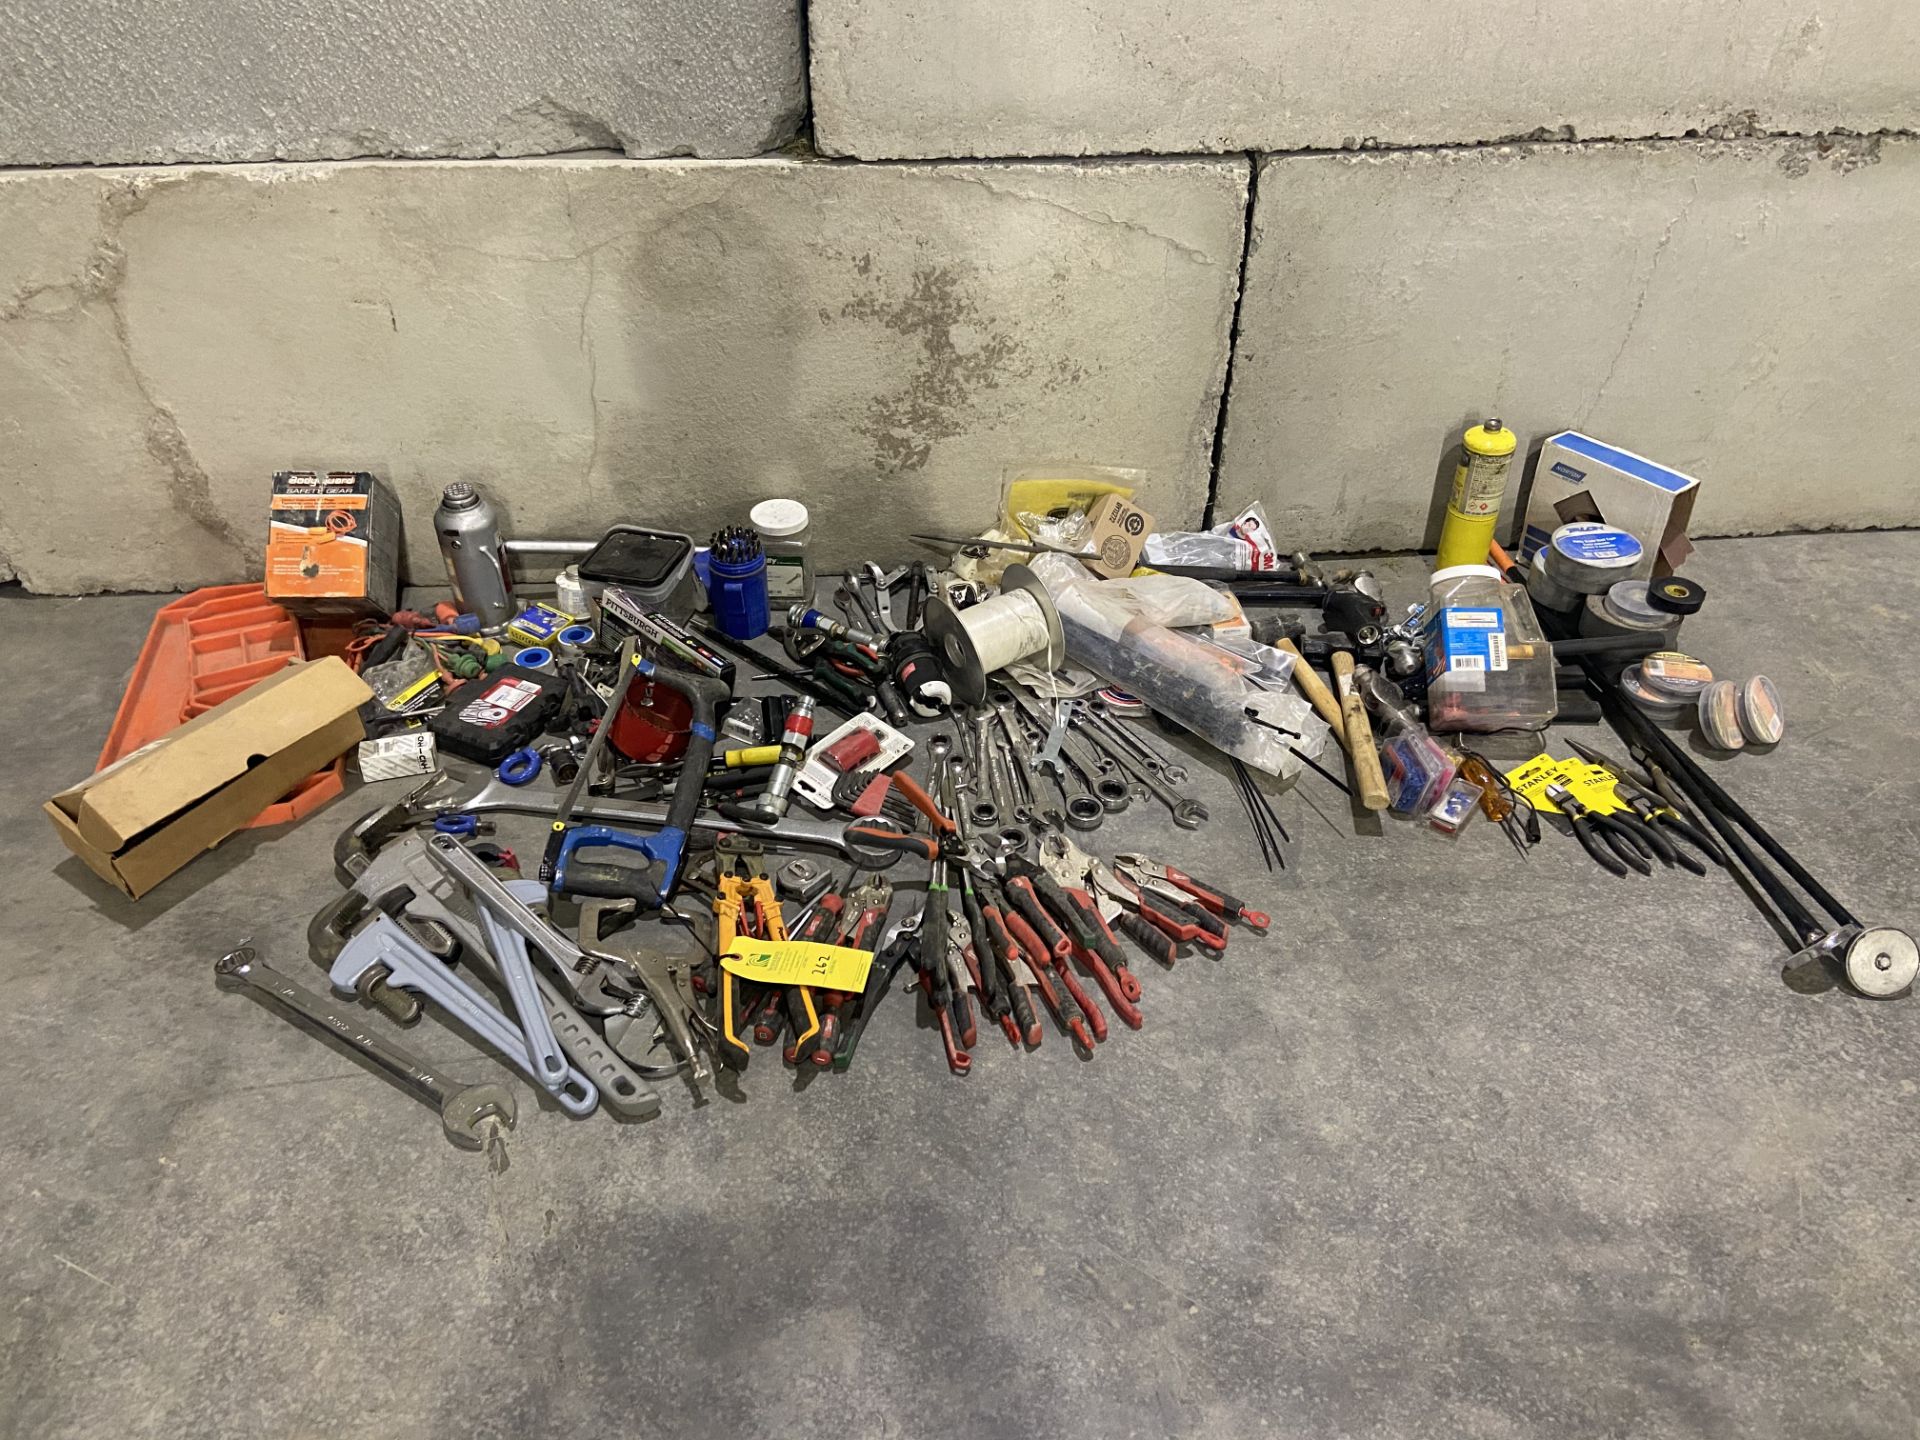 Miscellaneous Hand Tools (All Pictured), Rigging Fee: $10